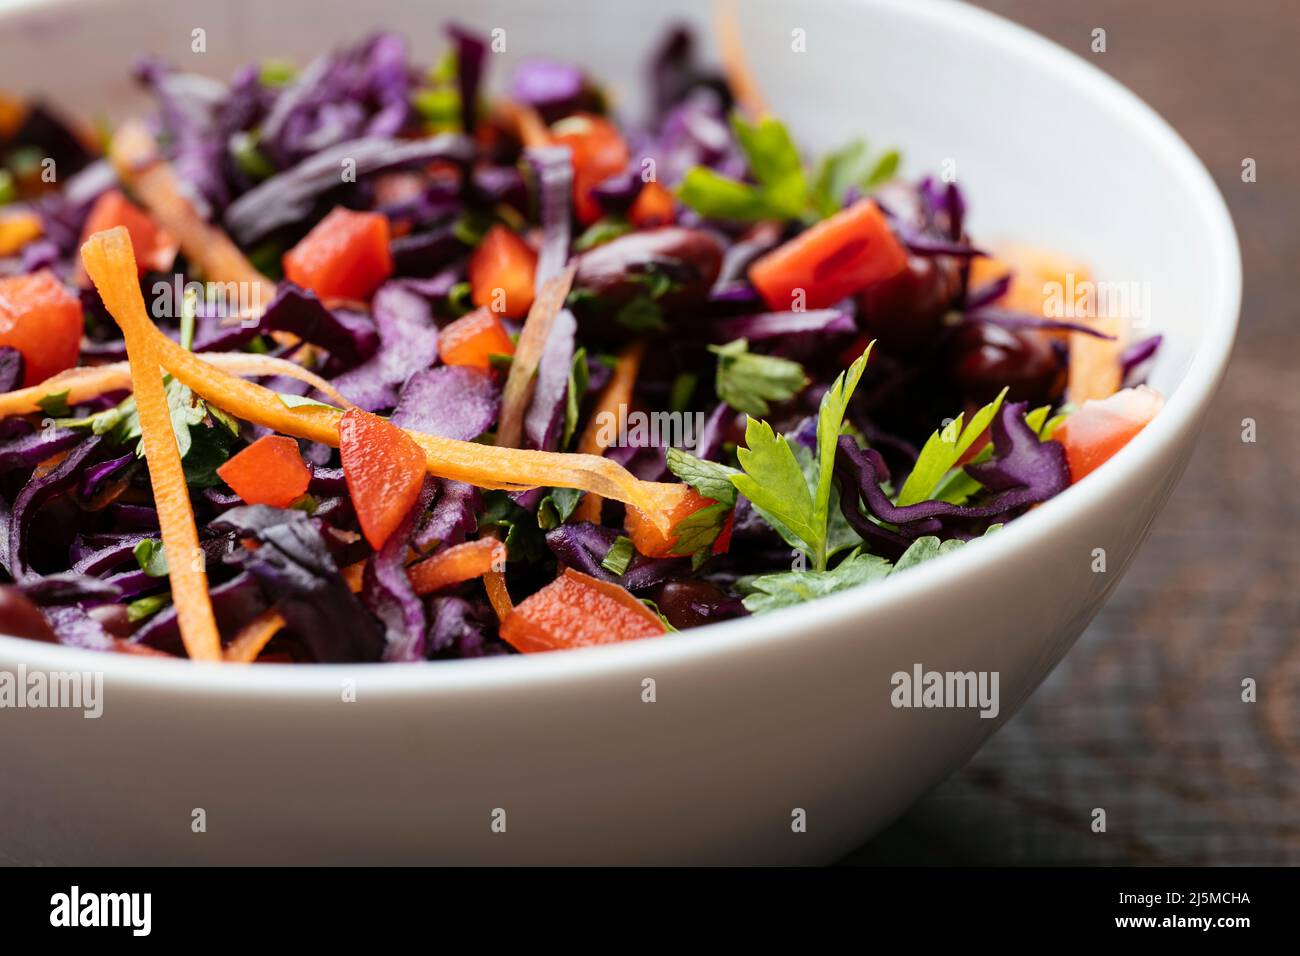 Bowl with a home made Kidney Bean and Purple Cabbage Salad with carrots and red bell pepper. Stock Photo